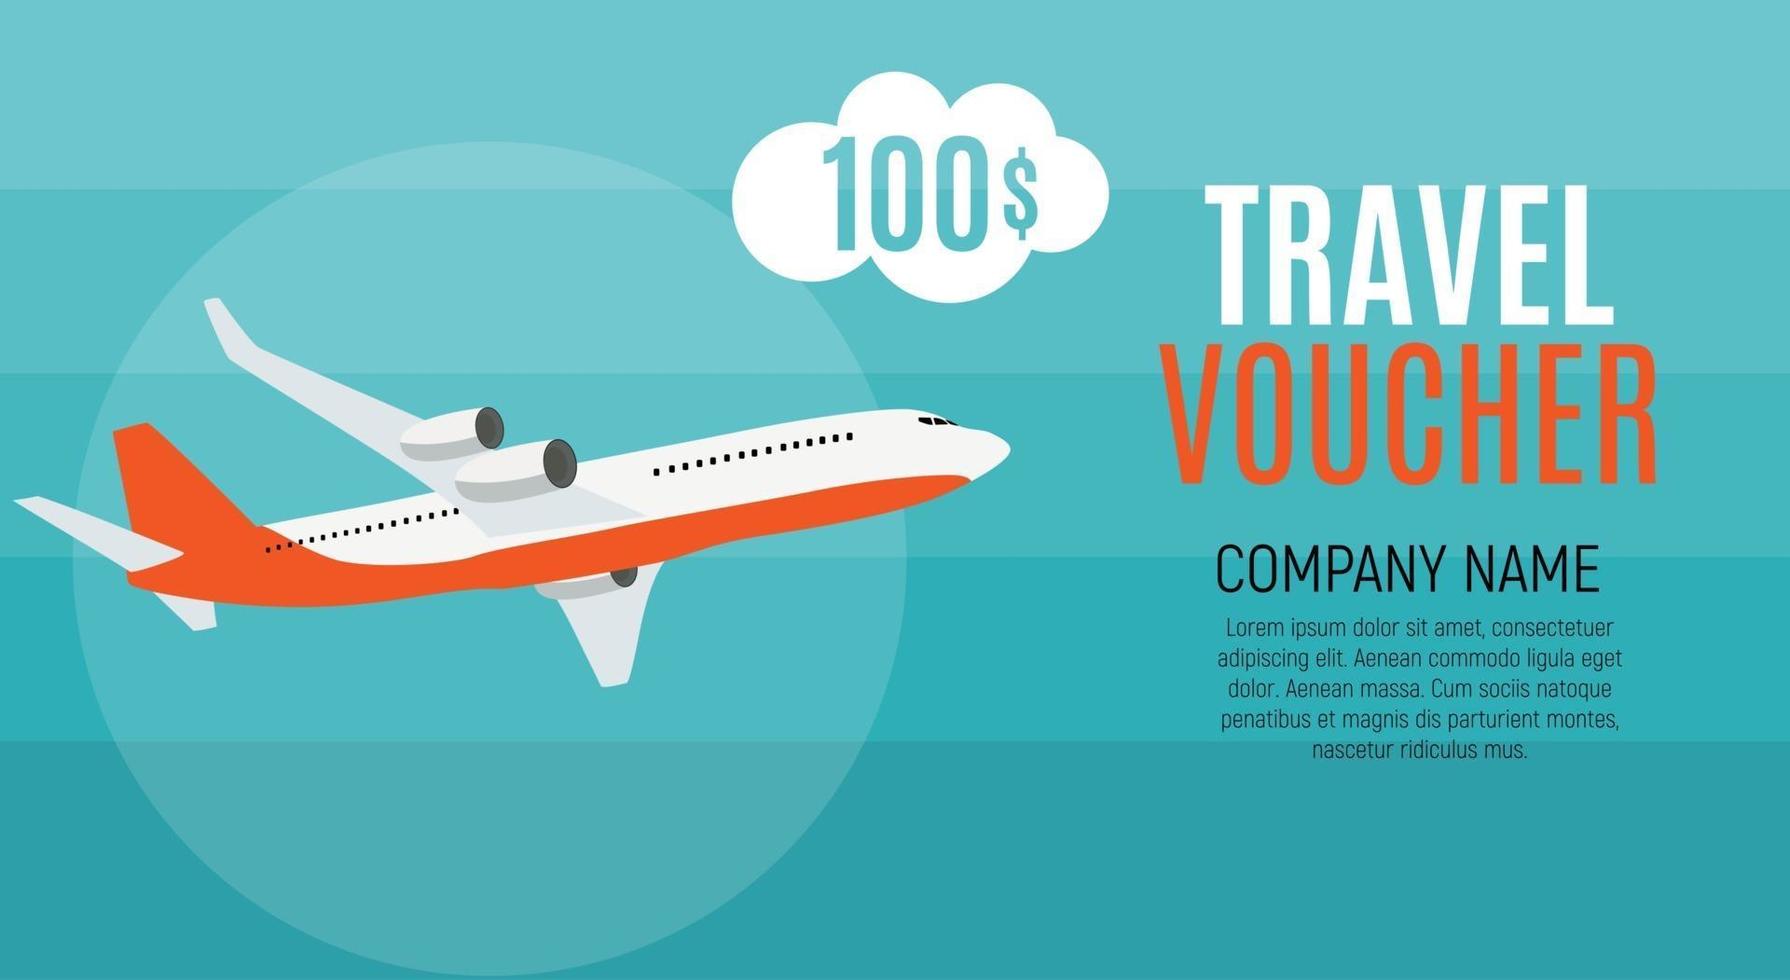 Travel Voucher 100 Dollar Template Background with Airplane vector